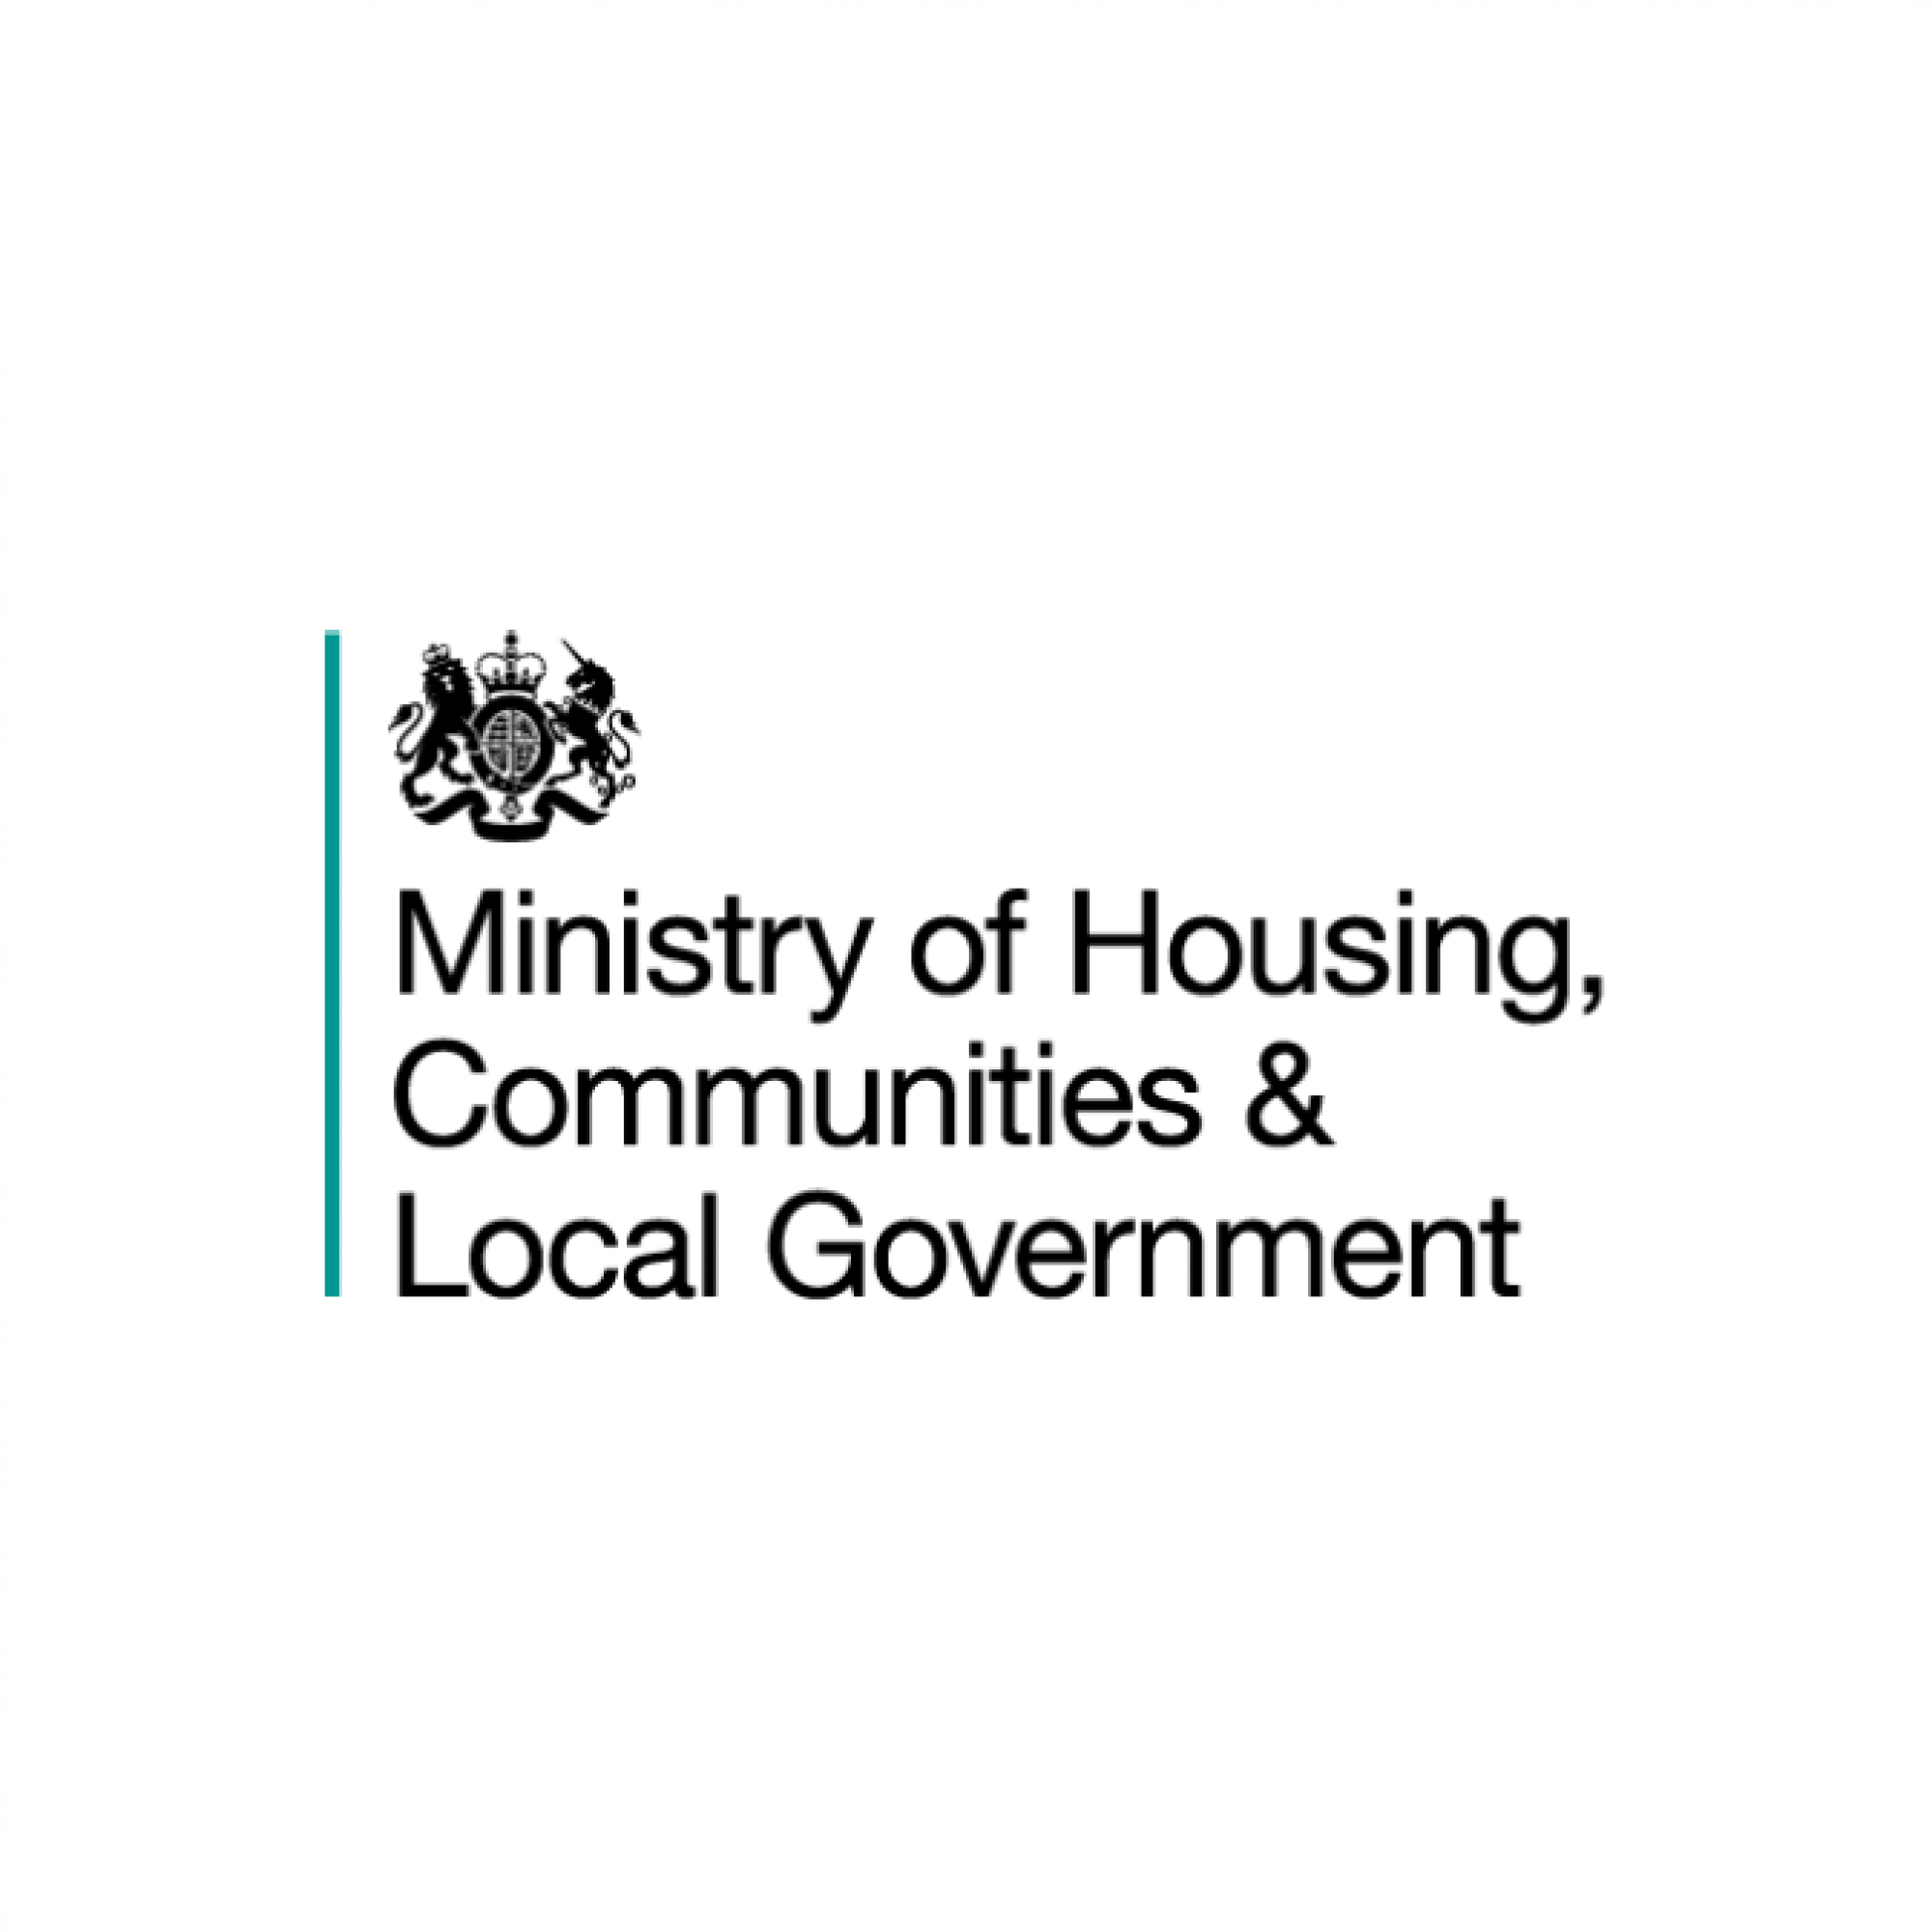 Letter from the Secretary of State - Local government in Somerset